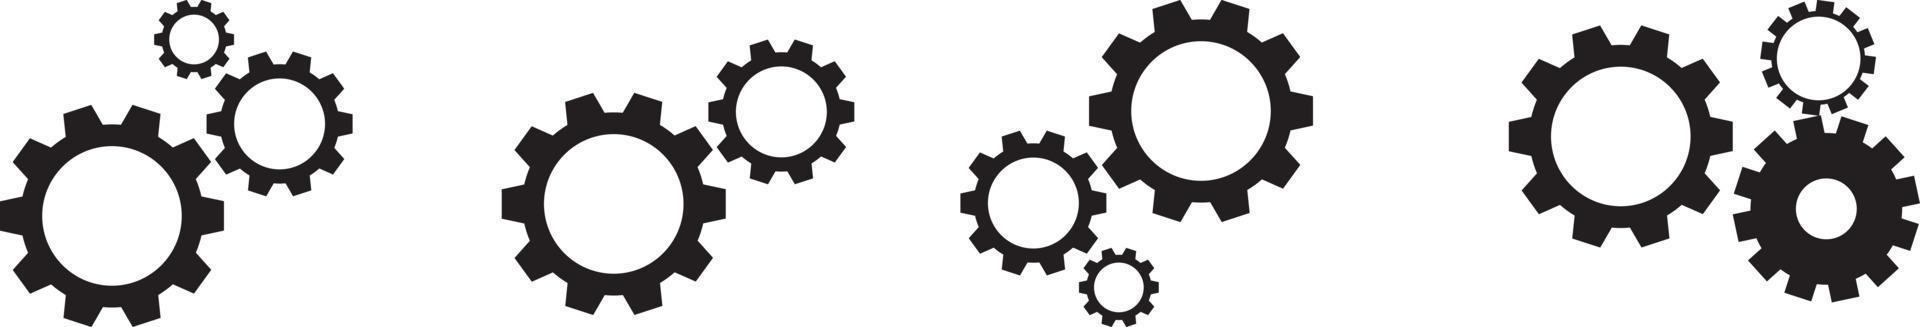 Setting gears icon. Cogwheel group. Gear design collection on white background, stock vector. vector